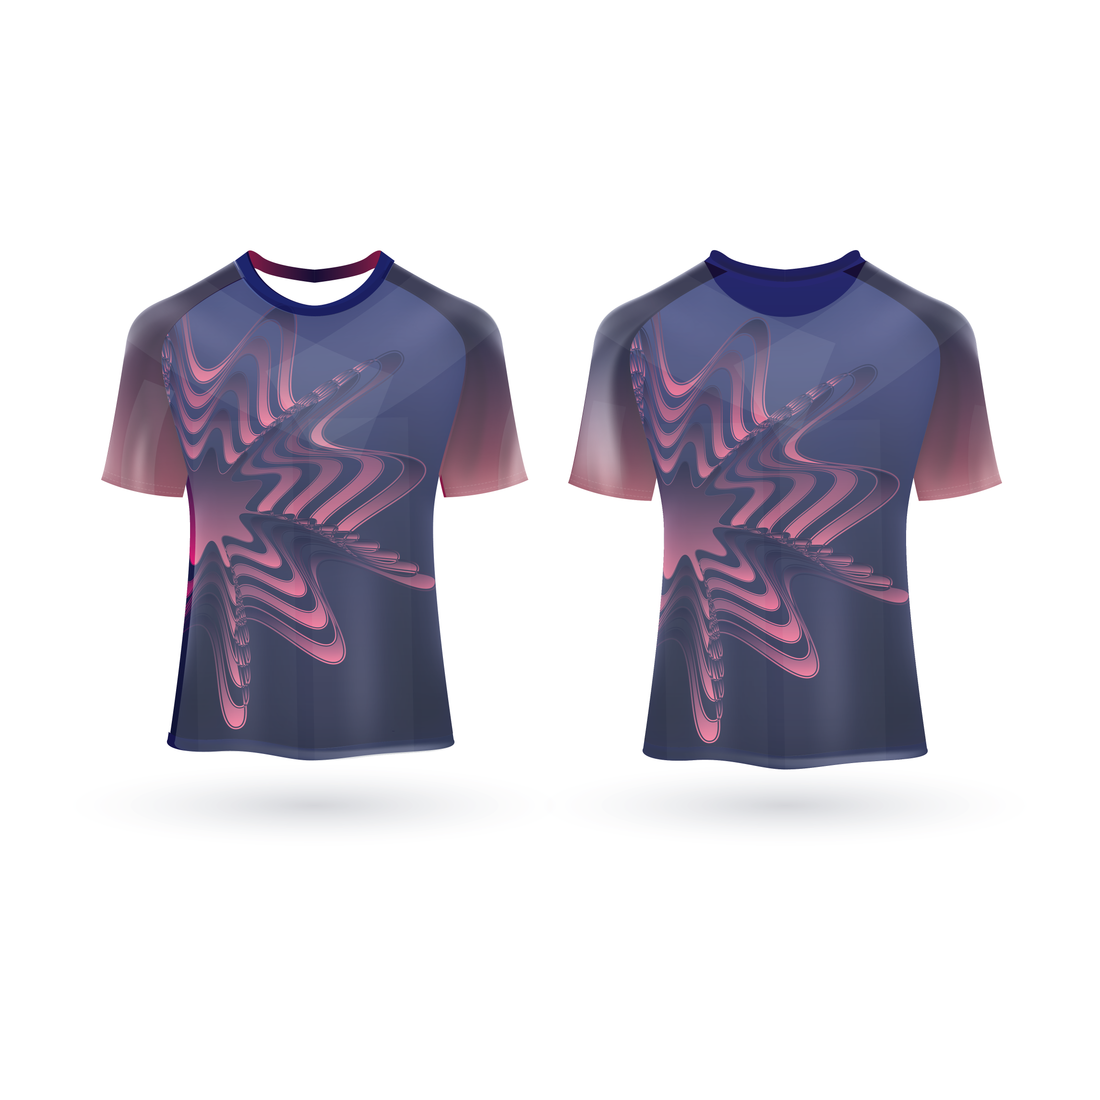 NEXT PRINT All Over Printed Customized Sublimation T-Shirt Unisex Sports Jersey Player Name & Number, Team Name NP50000279